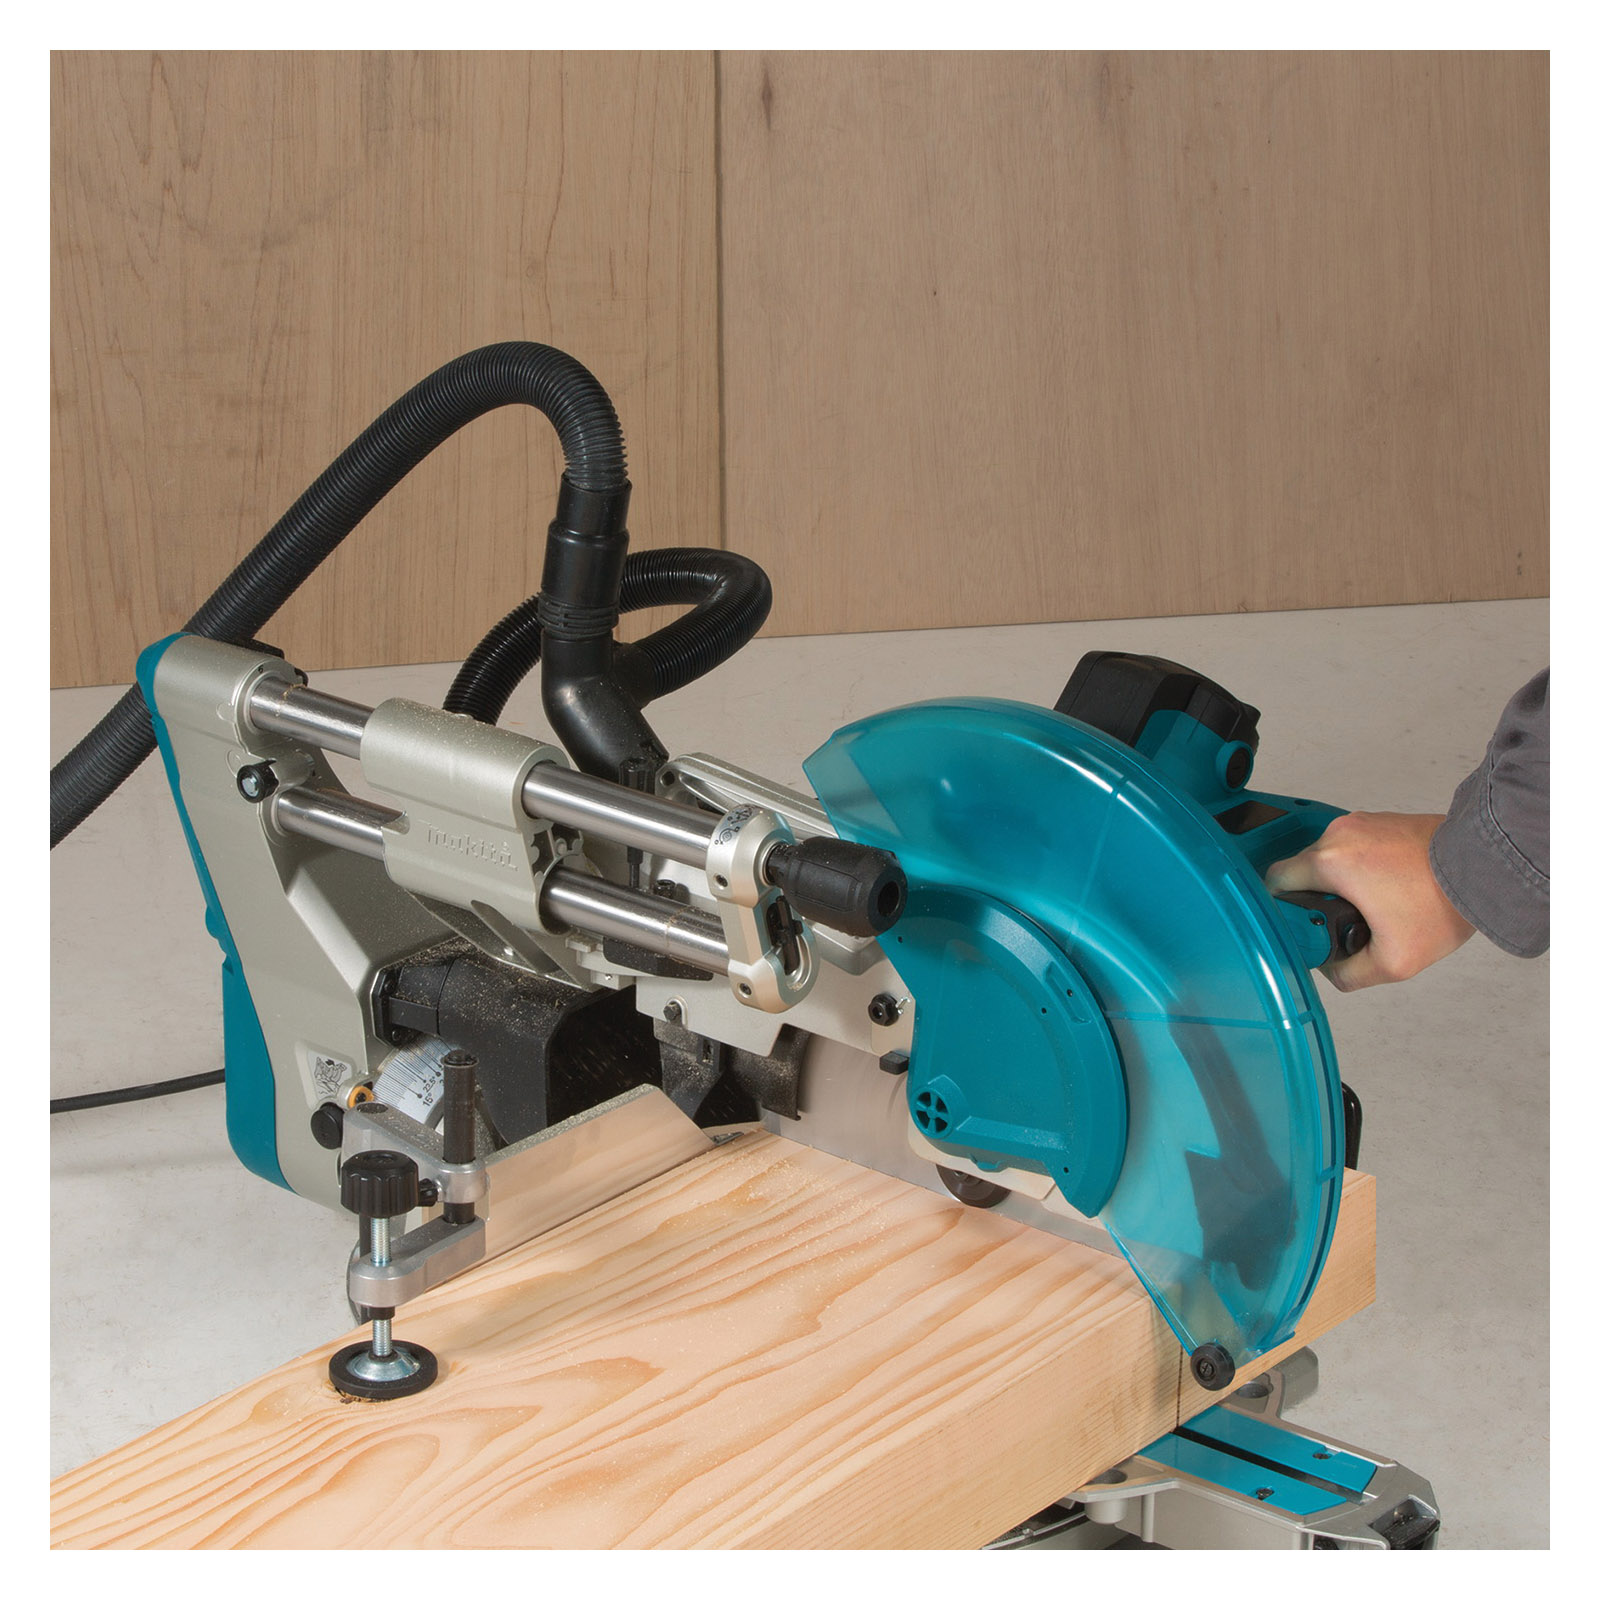 Makita LS1219L Sliding Compound Miter Saw, 12 in Dia Blade, 3-5/8 x 15 in Cutting Capacity, 3200 rpm Speed - 2